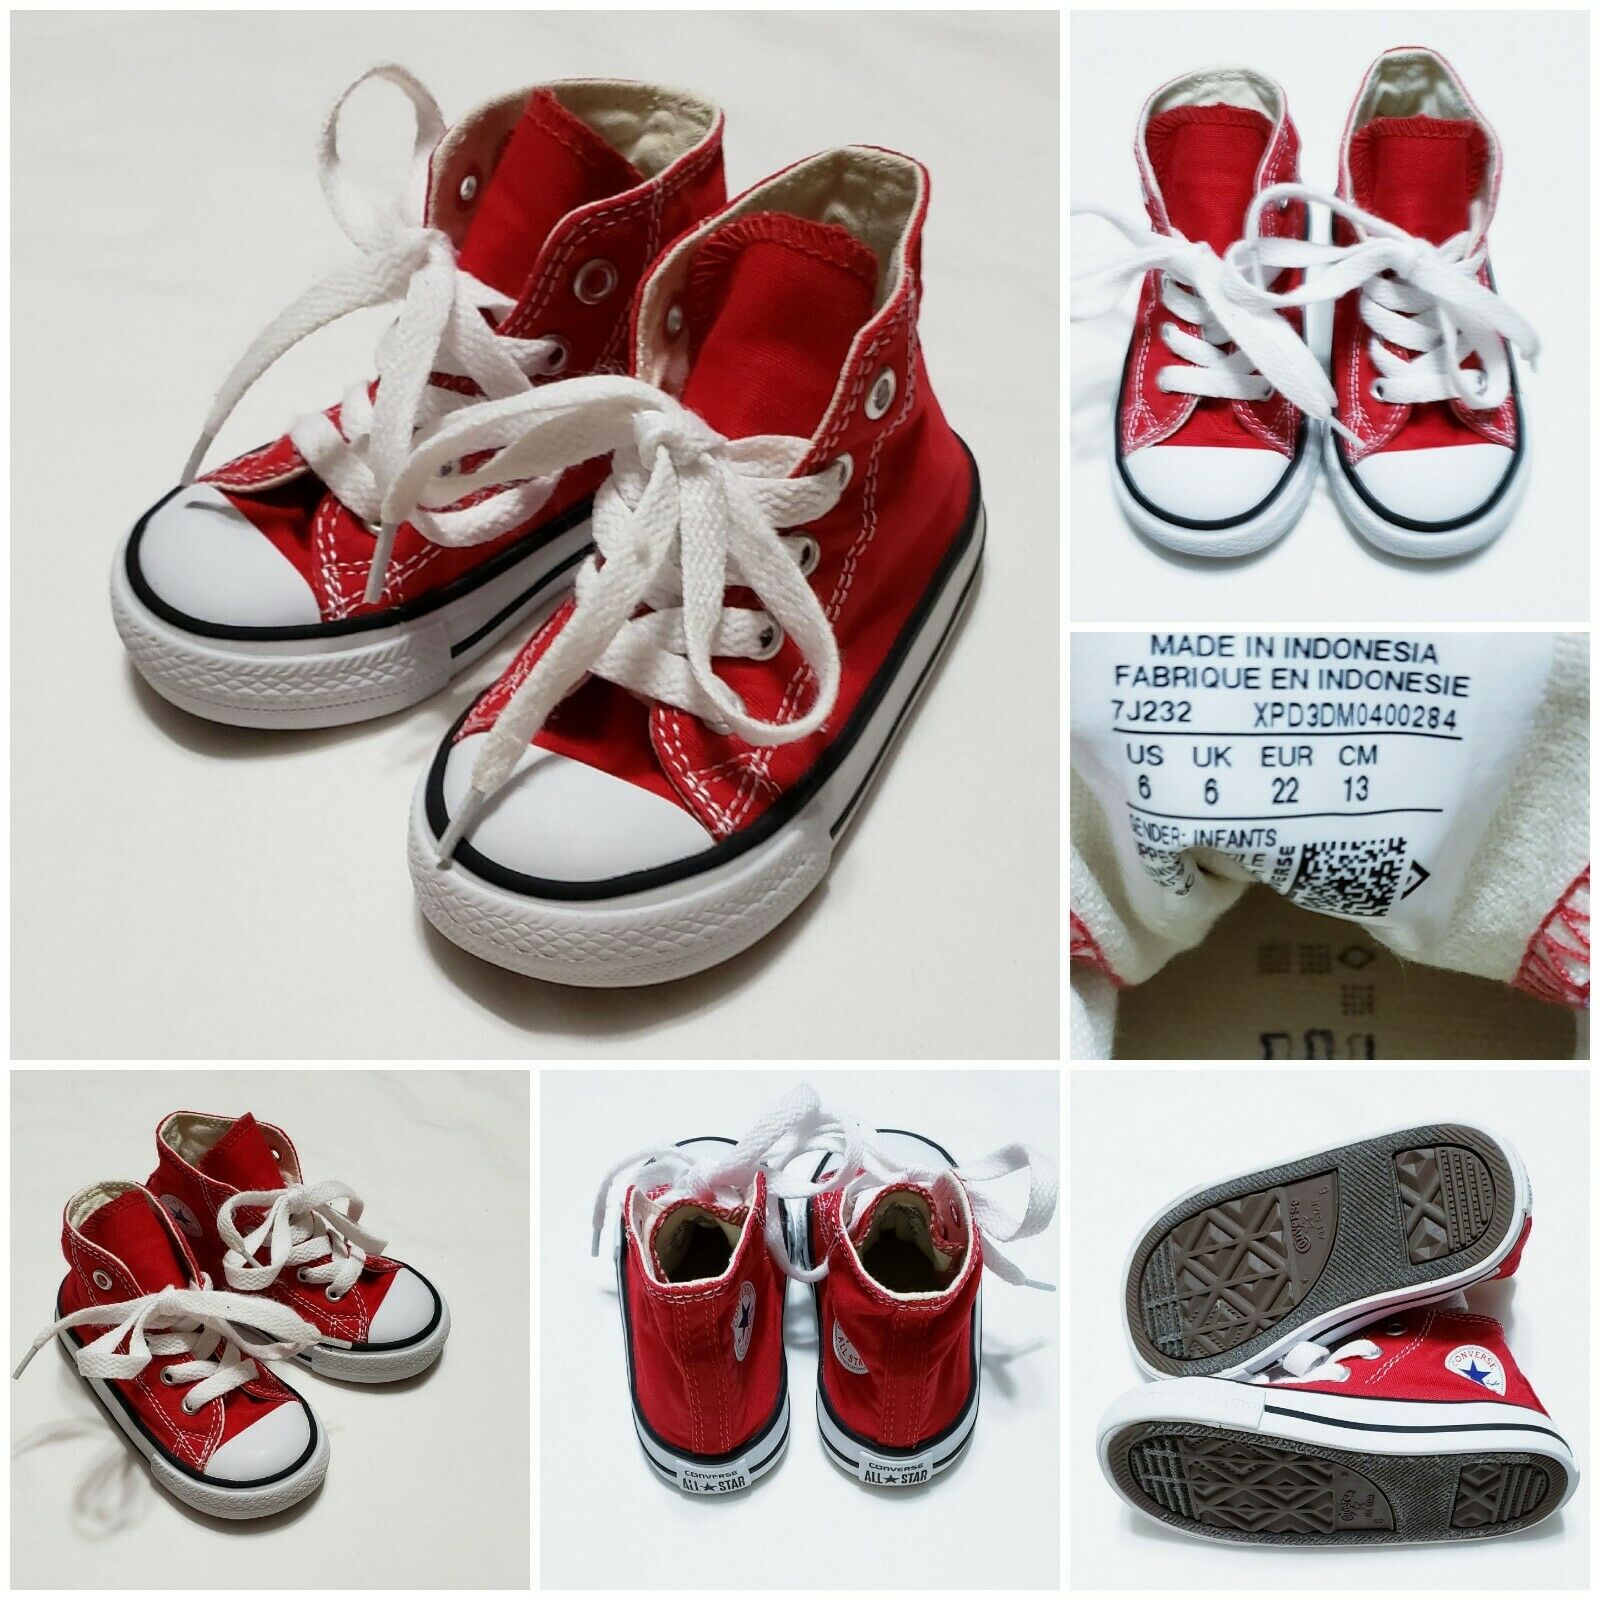 Toddler Boy's Size 6 Converse All Star Red High Top Athletic Shoes